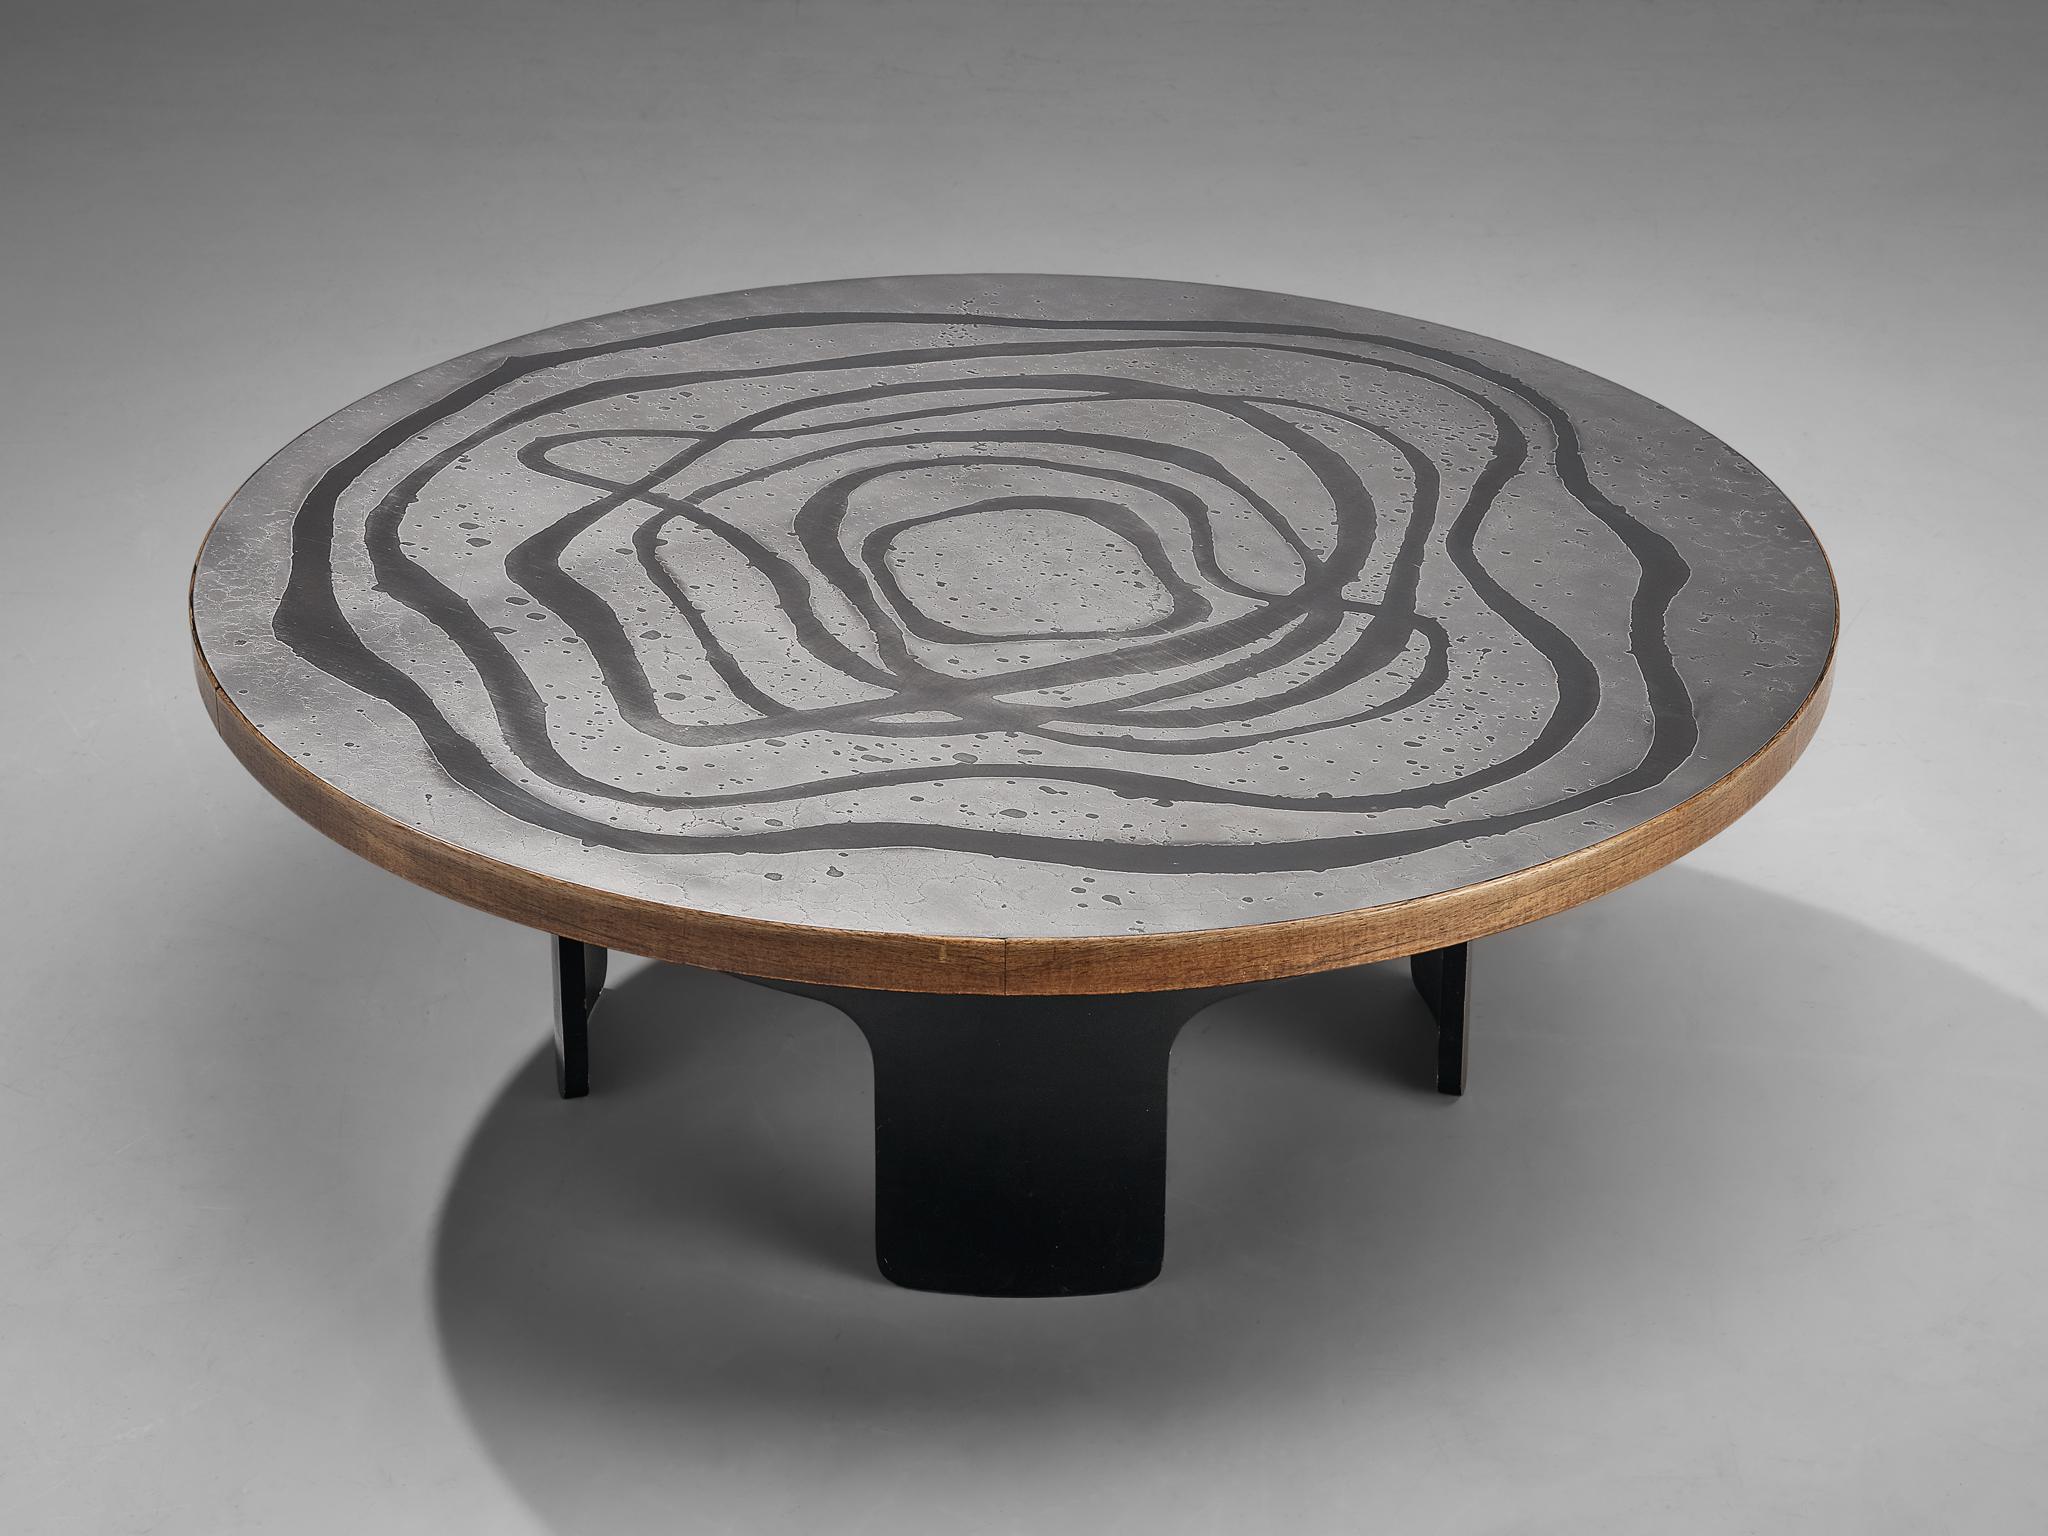 Heinz Lilienthal, coffee table, walnut, aluminum, wood, Germany, 1960s. 

This unique, handmade coffee table is design by Heinz Lilienthal (1927-2006) and is based on a well thought out construction. The tabletop displays a beautiful etched pattern